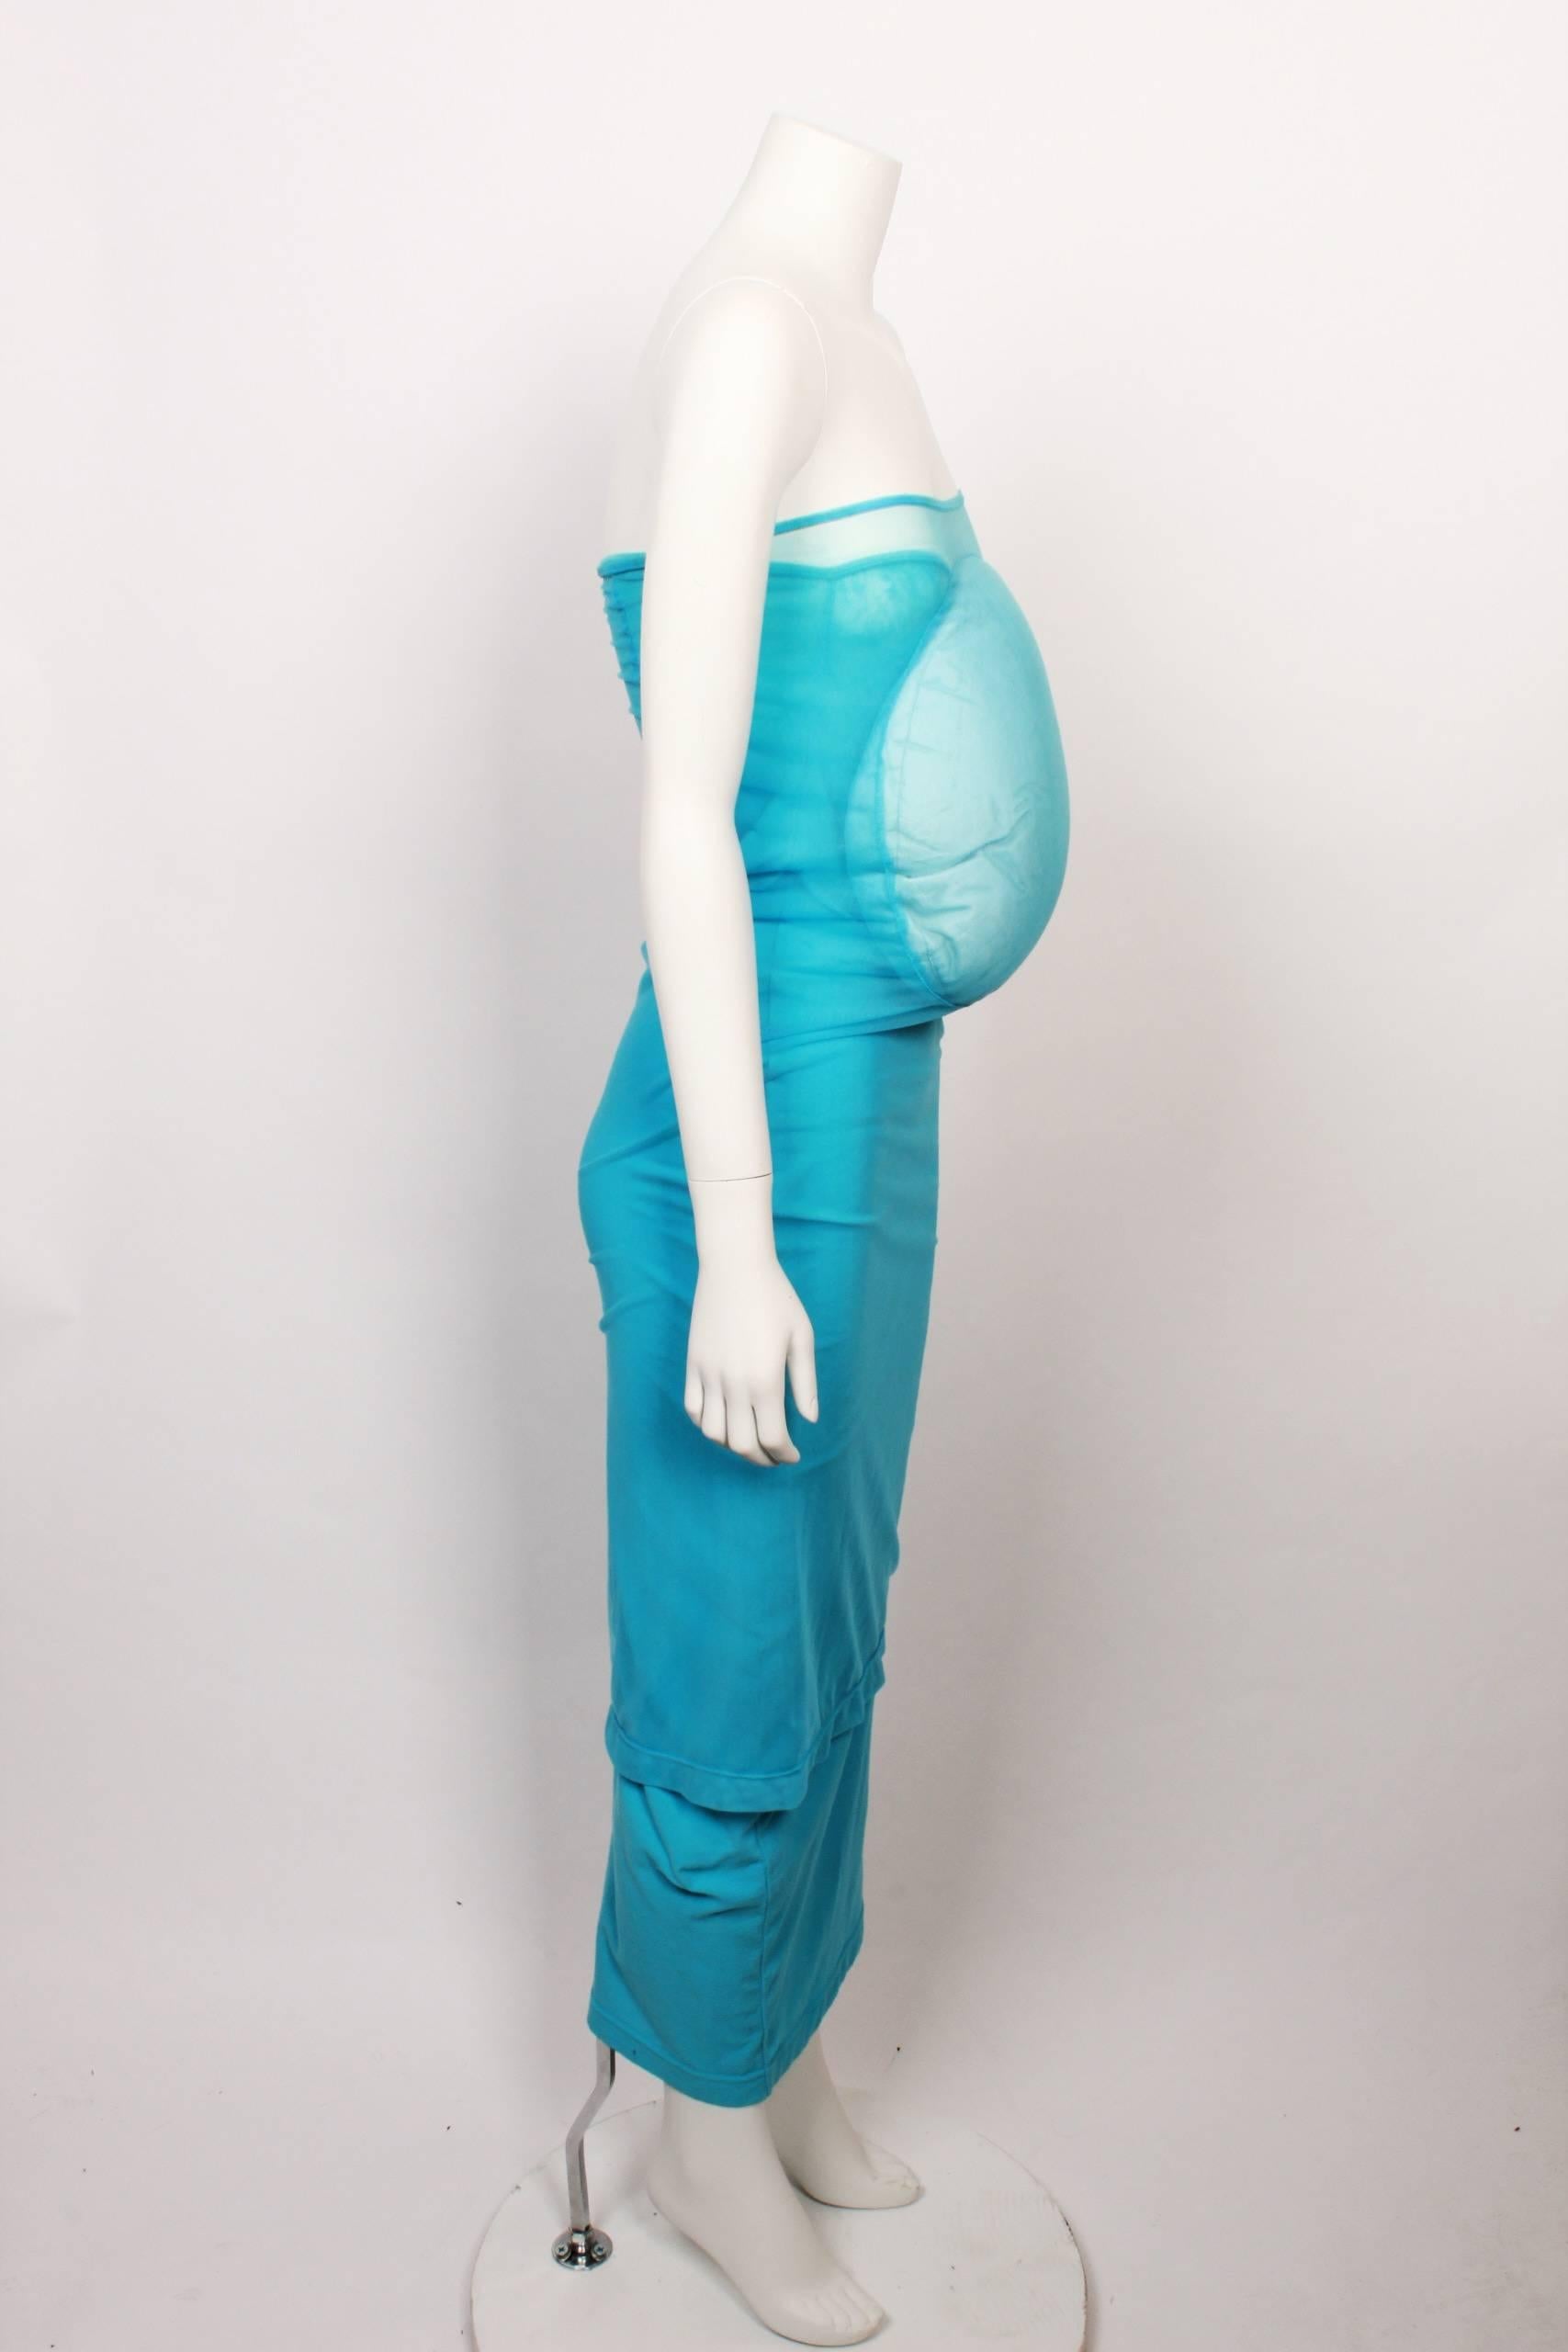 Comme  Des Garcons Lumps and Bumps turquoise tube dress from the iconic and legendary 1997 Body meets Dress - Dress Meets Body collection. Lined nylon stretch sheer mesh tube with white padded bump. Rare. For the Comme Des Garcon